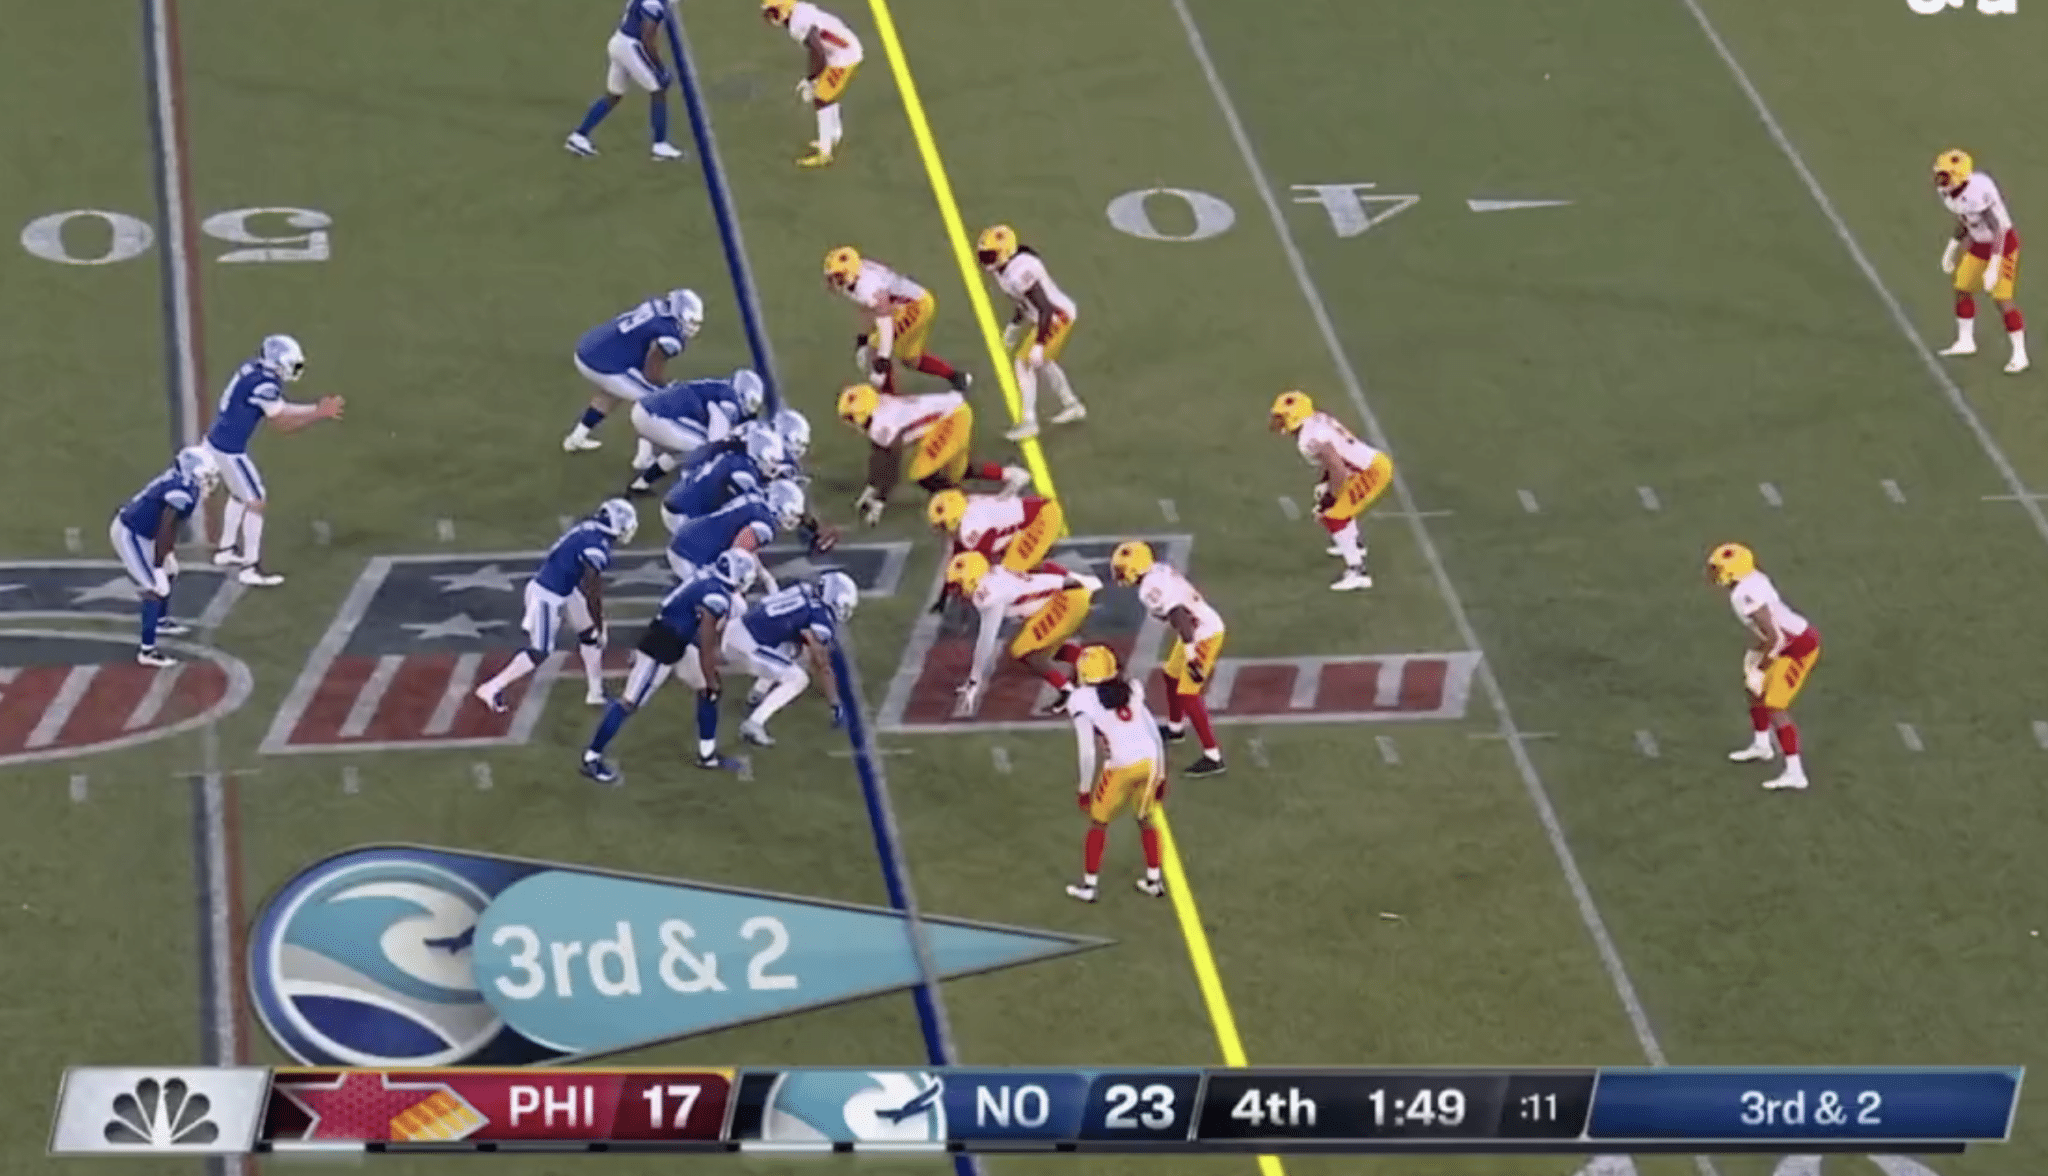 A Philadelphia Stars Defensive Lineman with the Last Name “Barnett” Committed a Backbreaking Third Down Penalty